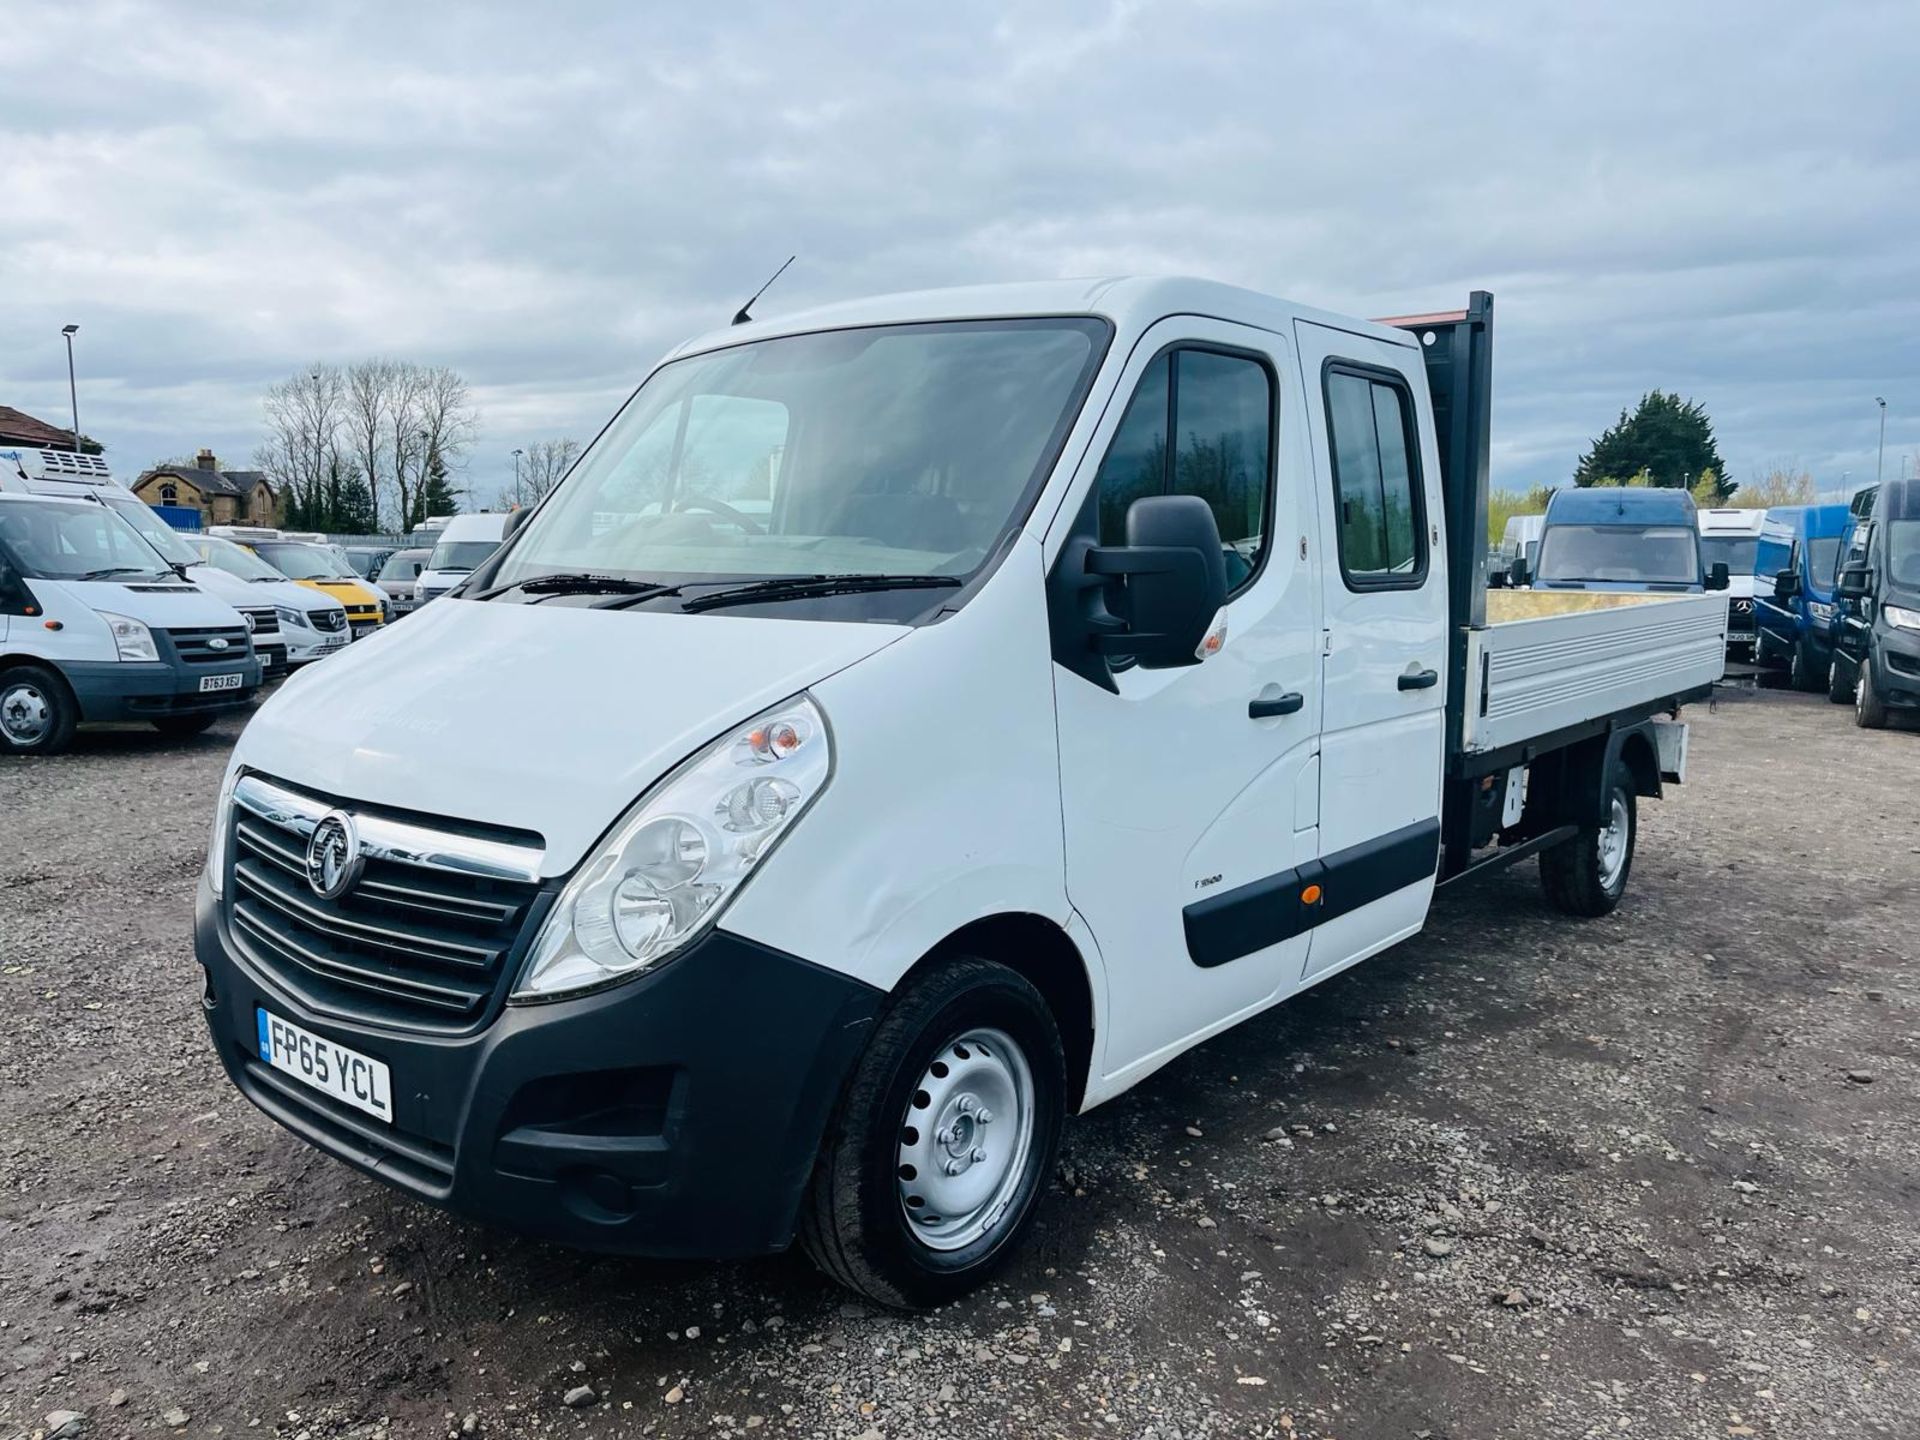 Vauxhall Movano 3.5T 2.3 CDTI 125 L3H1 Dropside CrewCab -Bluetooth Handsfree -1 Former Keeper - Image 3 of 27